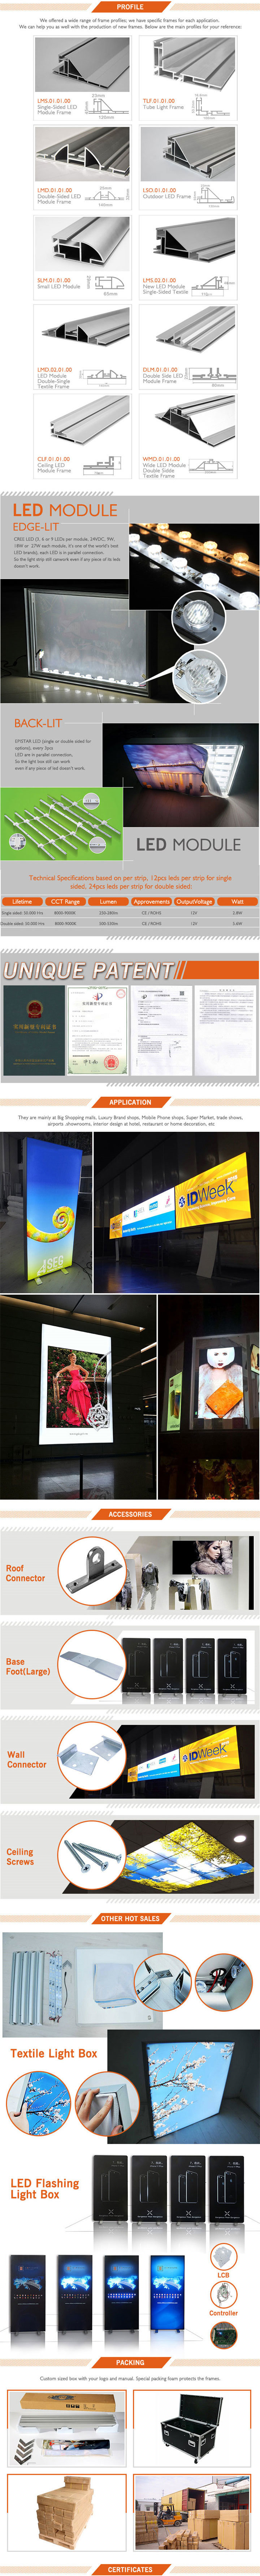 Display of Super Large Light Boxes at Subway Stations and Airport Duty-Free Shops